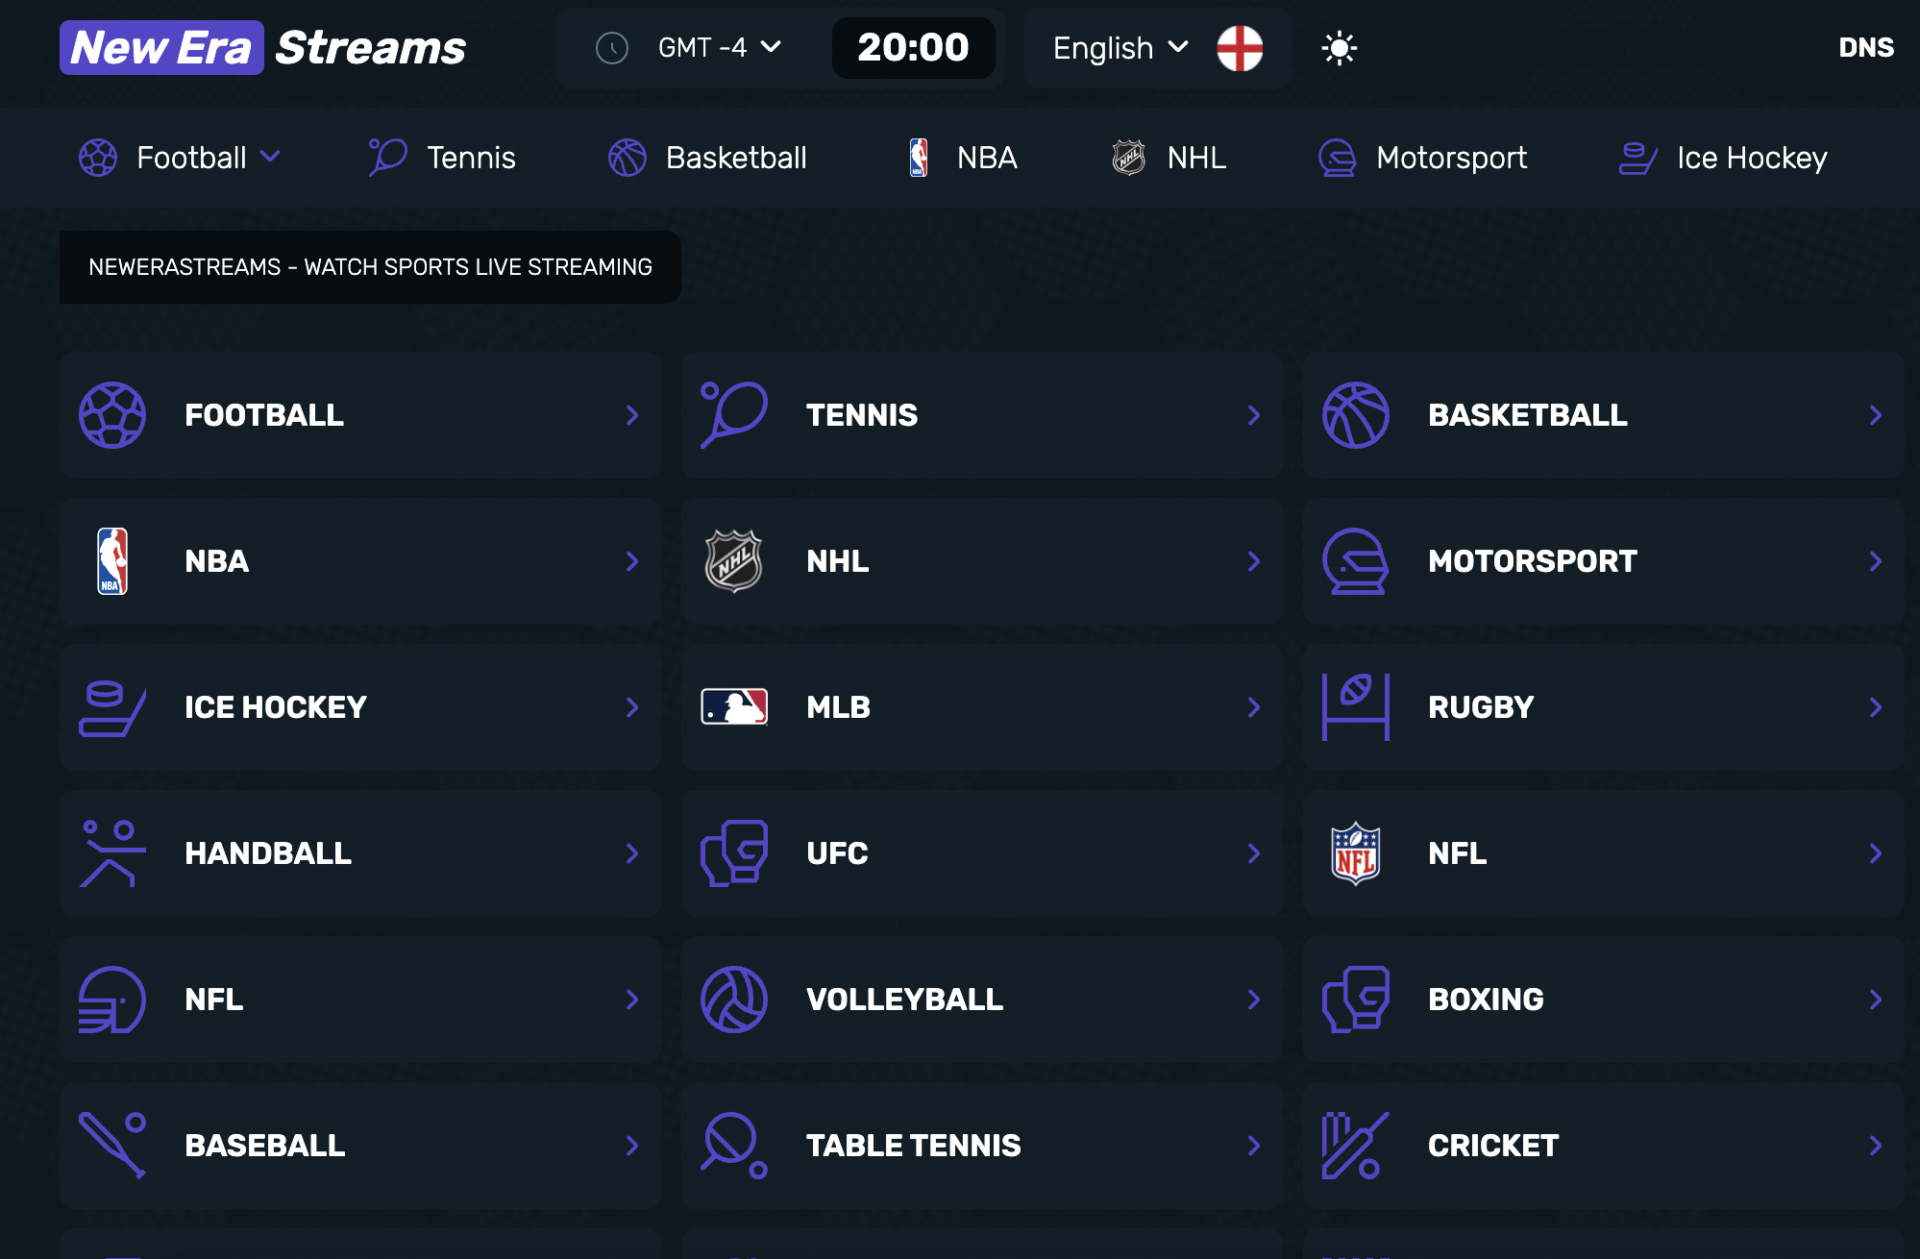 NewEra Streams is one of many free sports streaming websites available for watching sports games and other programs online.